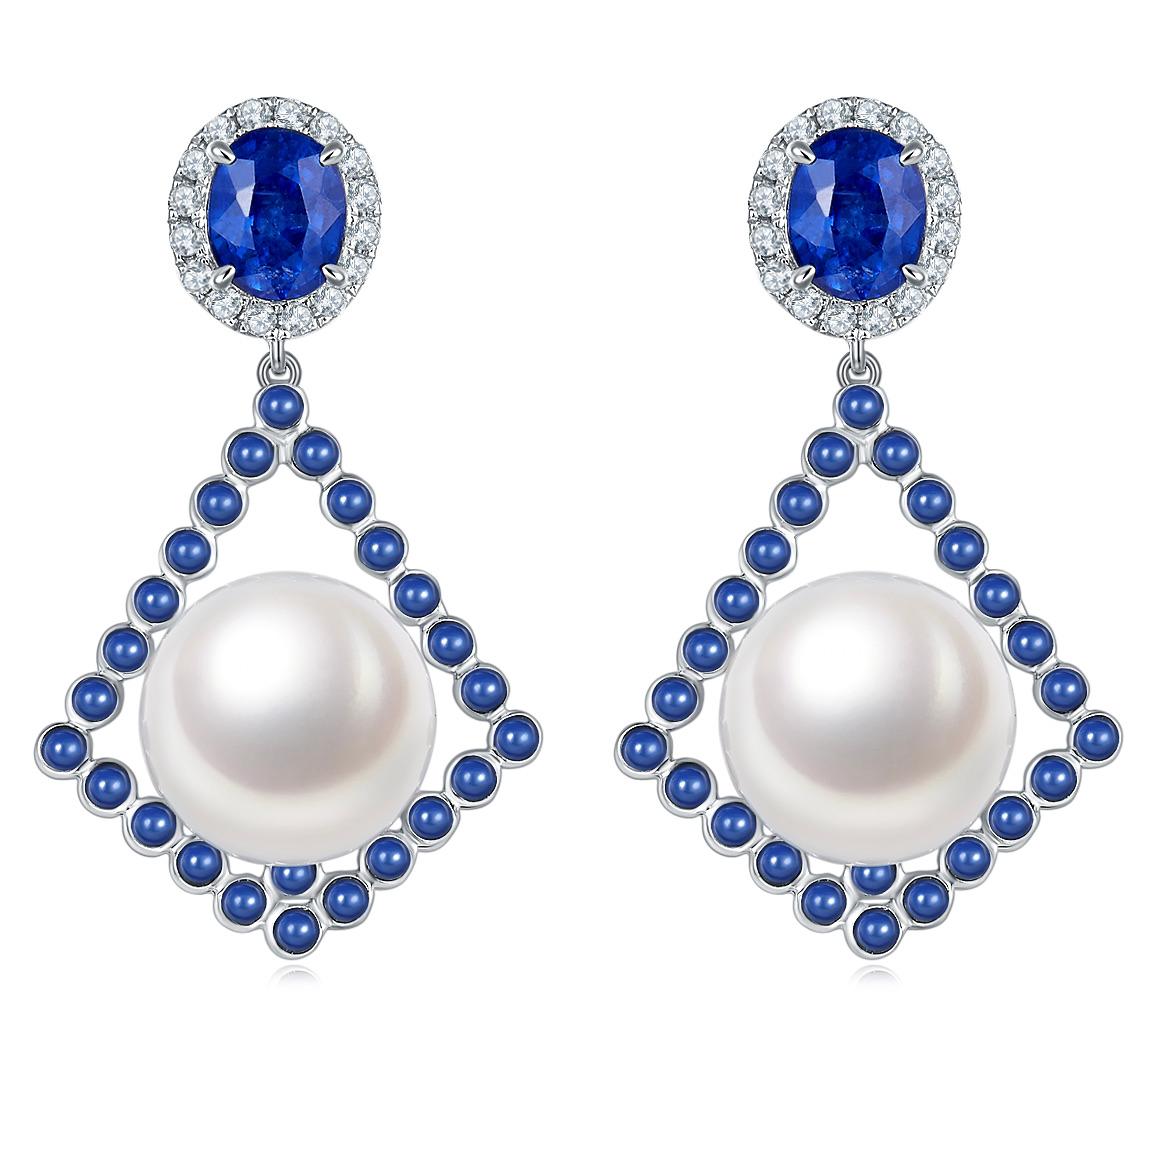 This is a pair of kite shape dangle Earring. The White South Sea Pearl is sitting on top of the kite geometric and surrounded by little Sapphire cabochon. It is then suspended below the oval shape faceted Sapphire, which is encrusted in a circle of